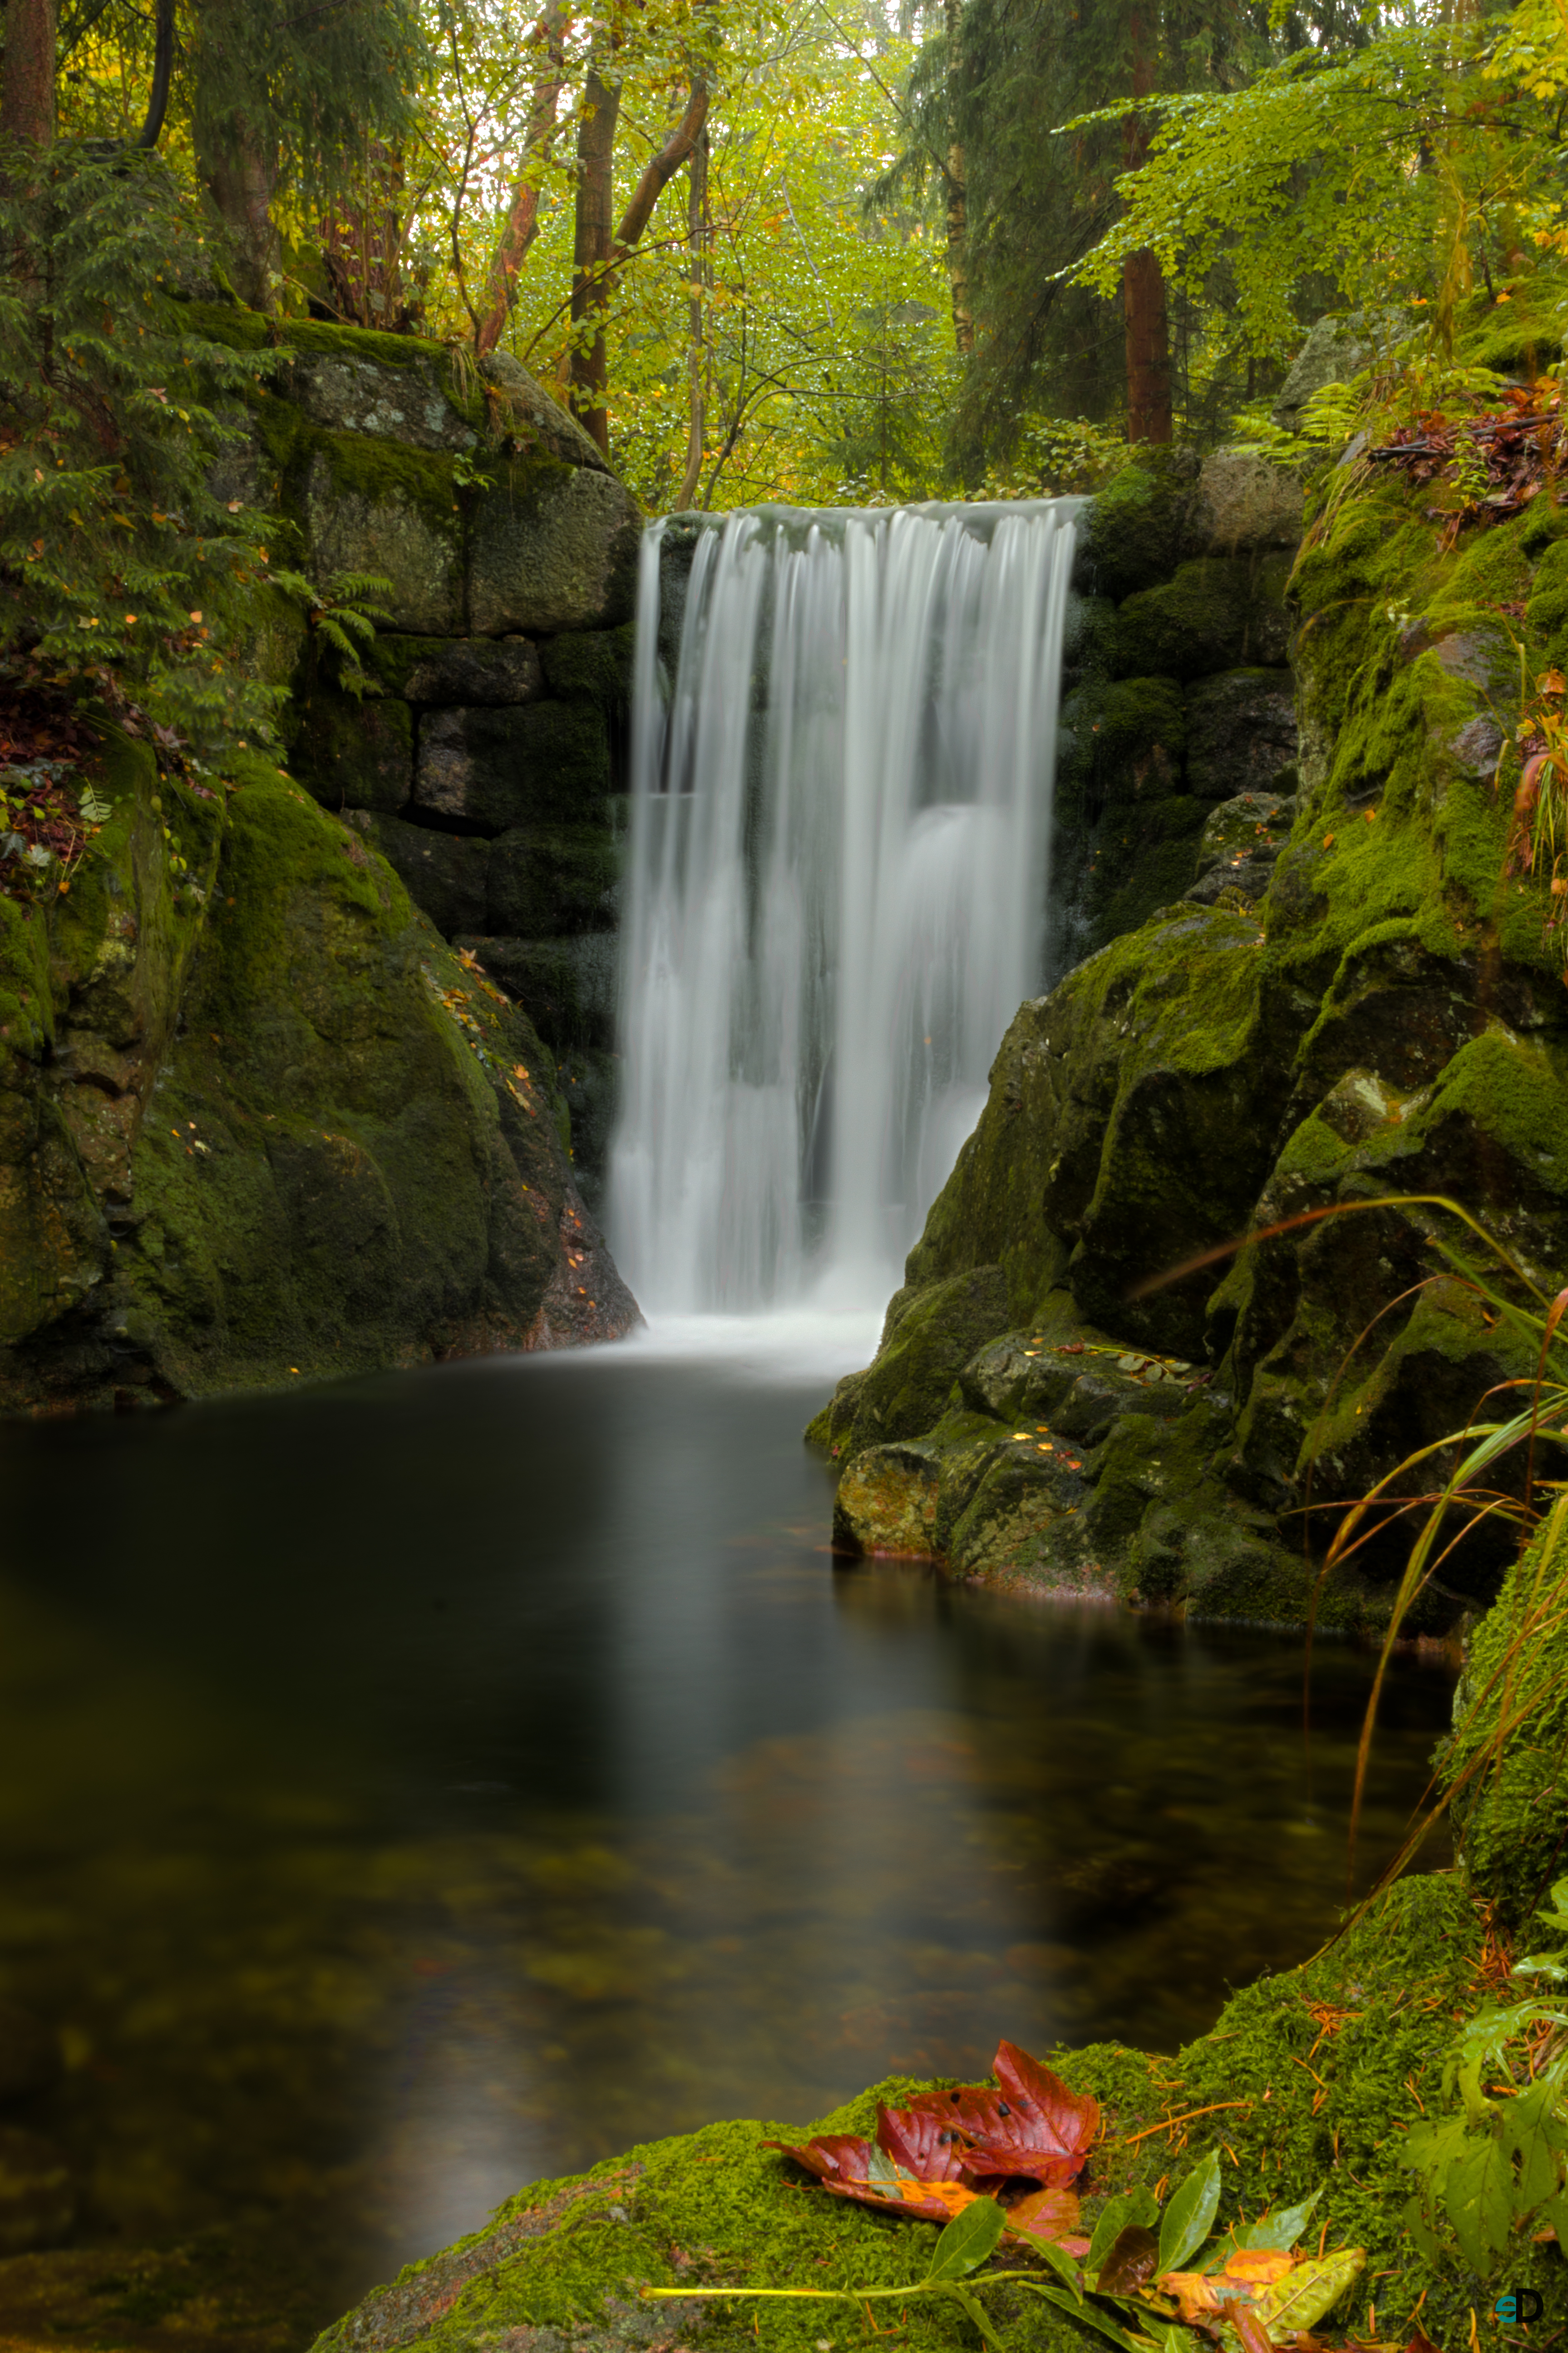 Popular Waterfall Image for Phone